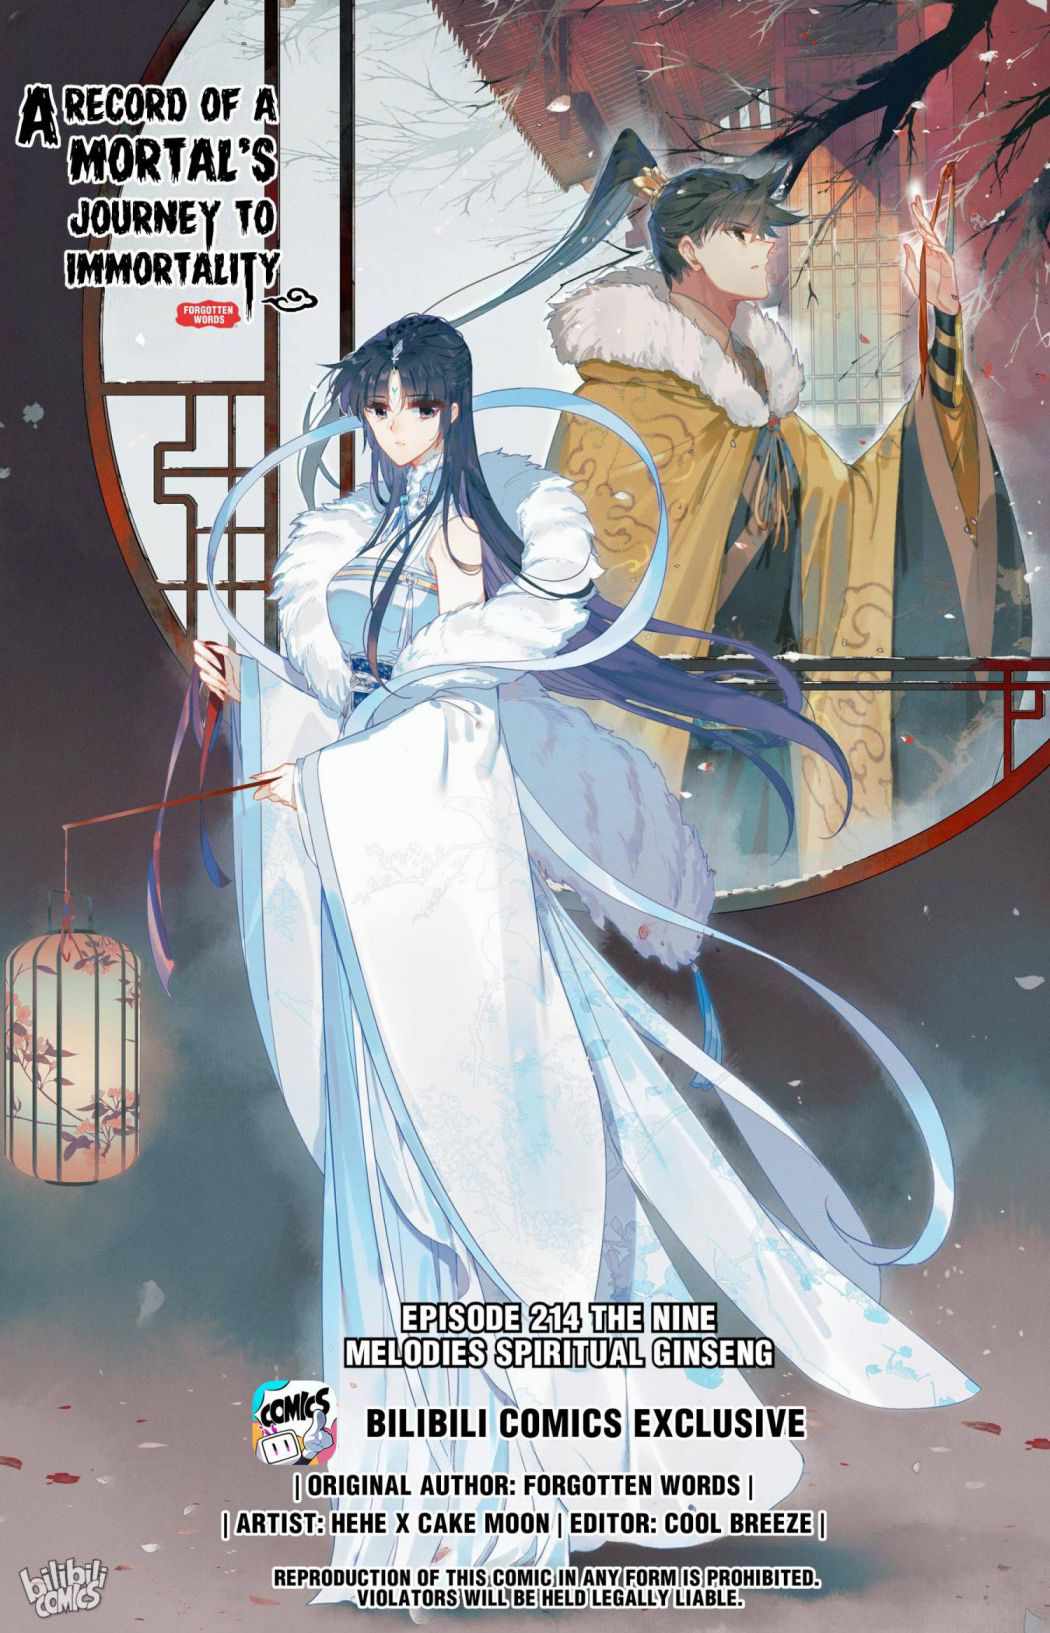 Mortal's Cultivation: journey to immortality Chapter 214